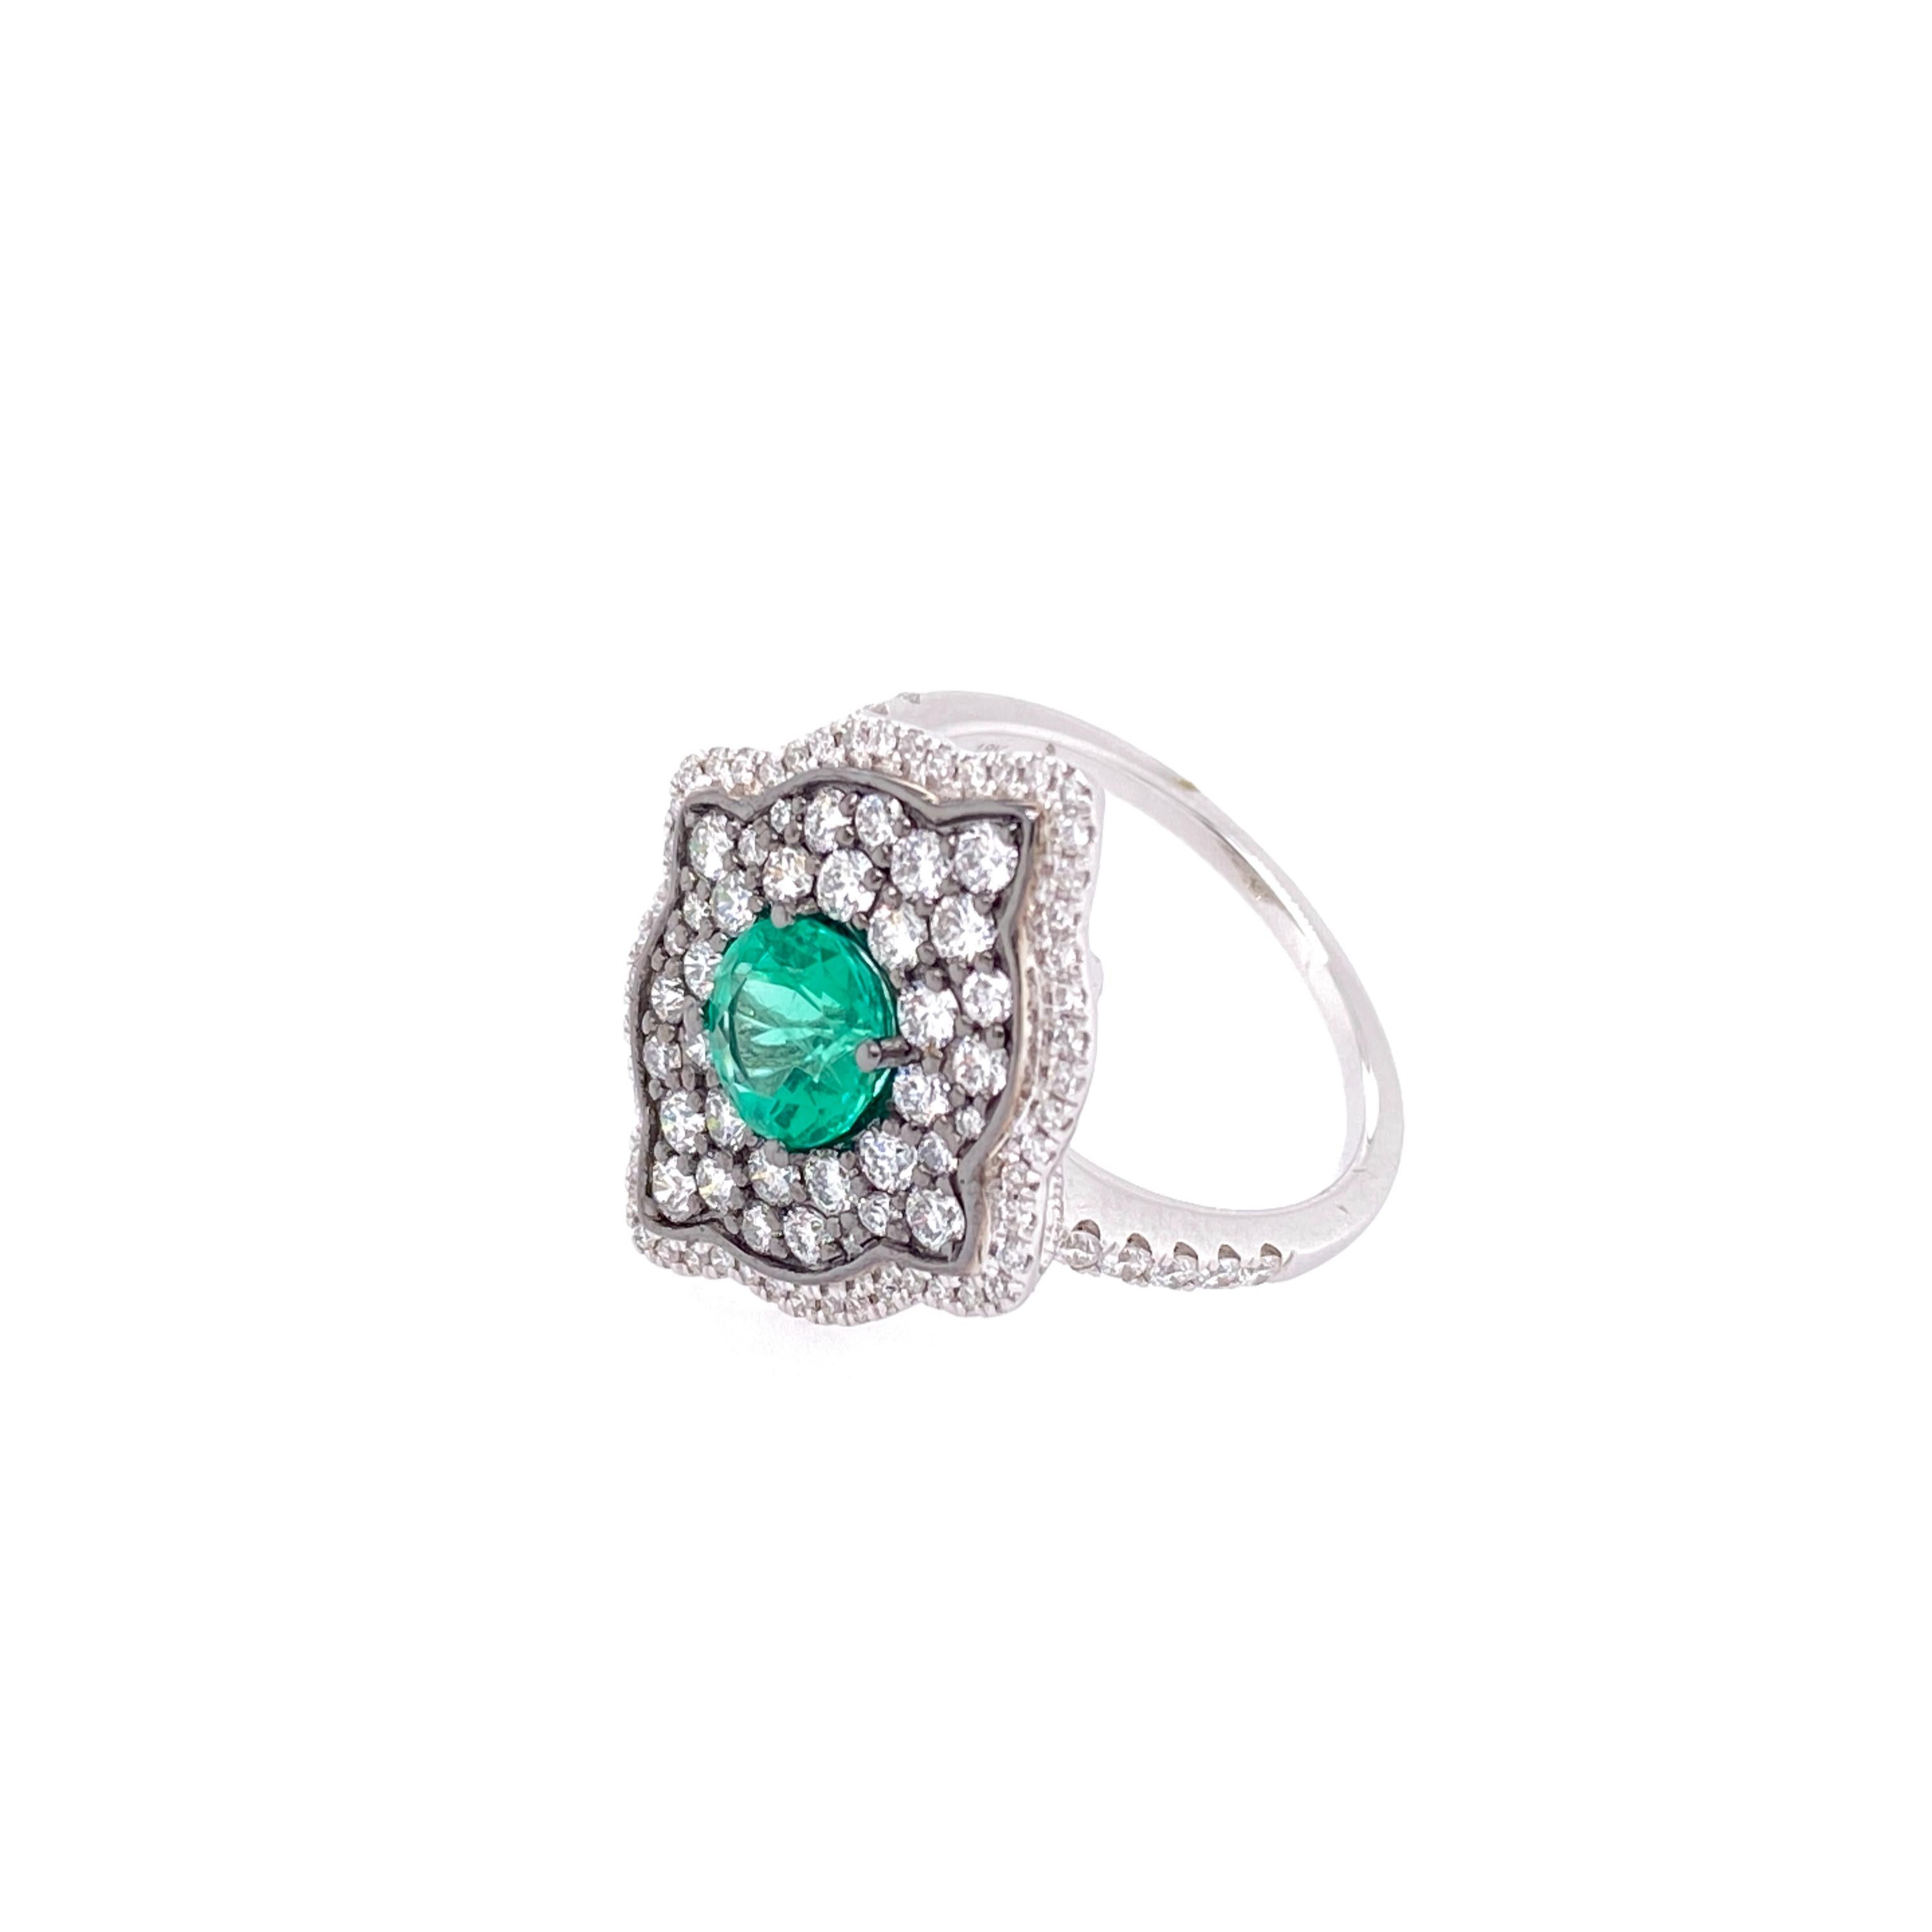 Women's 0.91 Carat Round Emerald and Diamond Cocktail Ring